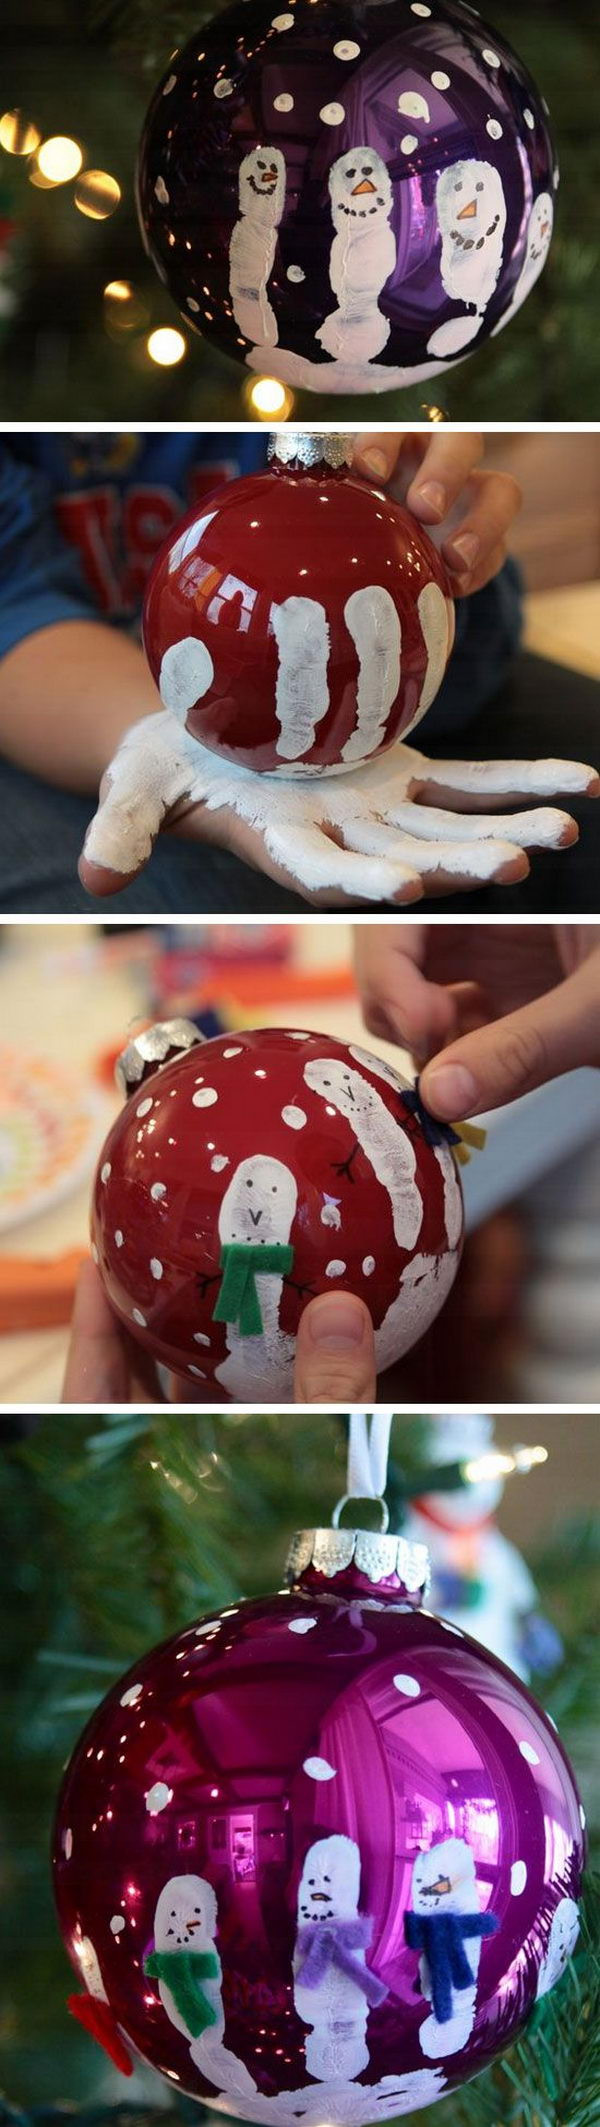 DIY Crafts Kids
 Easy & Creative Christmas DIY Projects That Kids Can Do